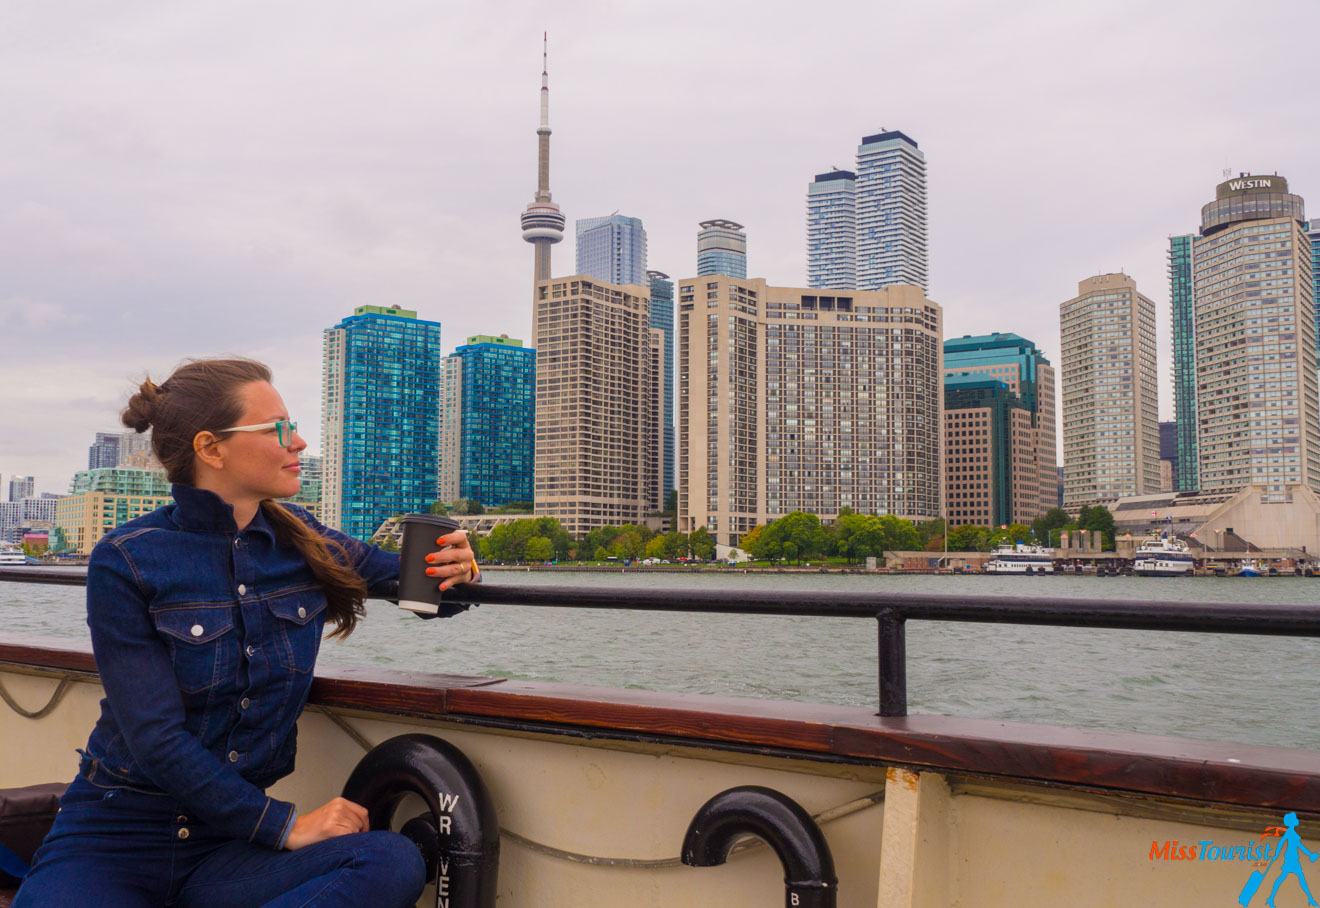 The author of the post in a denim jacket and glasses holds a drink while sitting on a boat, with a city skyline featuring tall buildings and a prominent tower in the background.